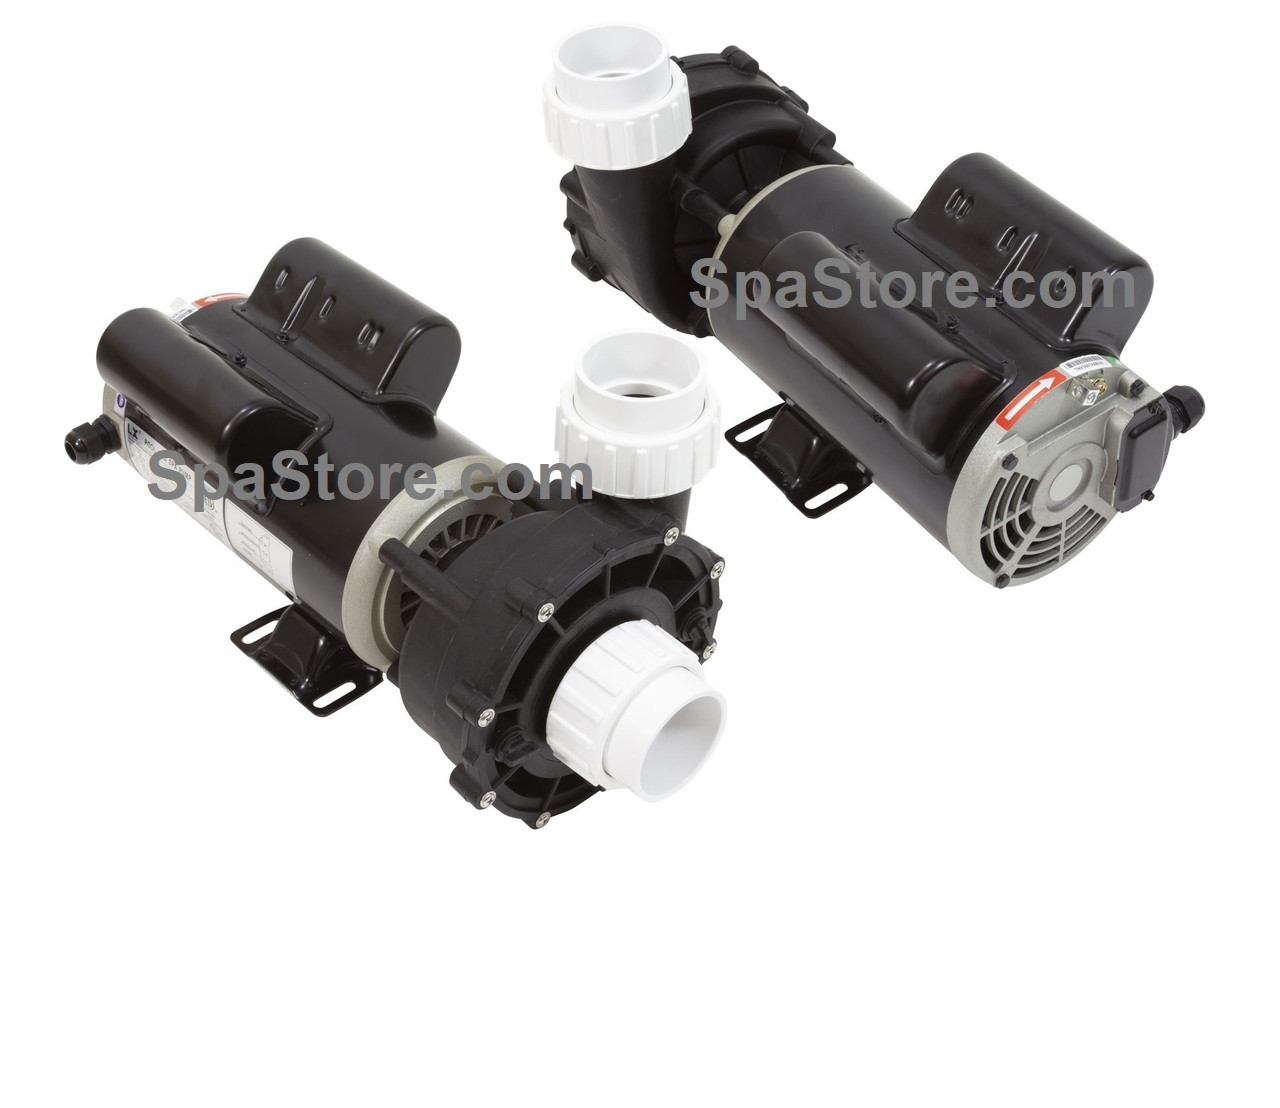 Samle Mammoth bejdsemiddel ✓Current Version Signature Spas Hot Tub Spa Energy Saver Spa Pump 3"  Fittings Replaced Obsolete 1 Speed 3 WIRE LX 48WUA0753C-1